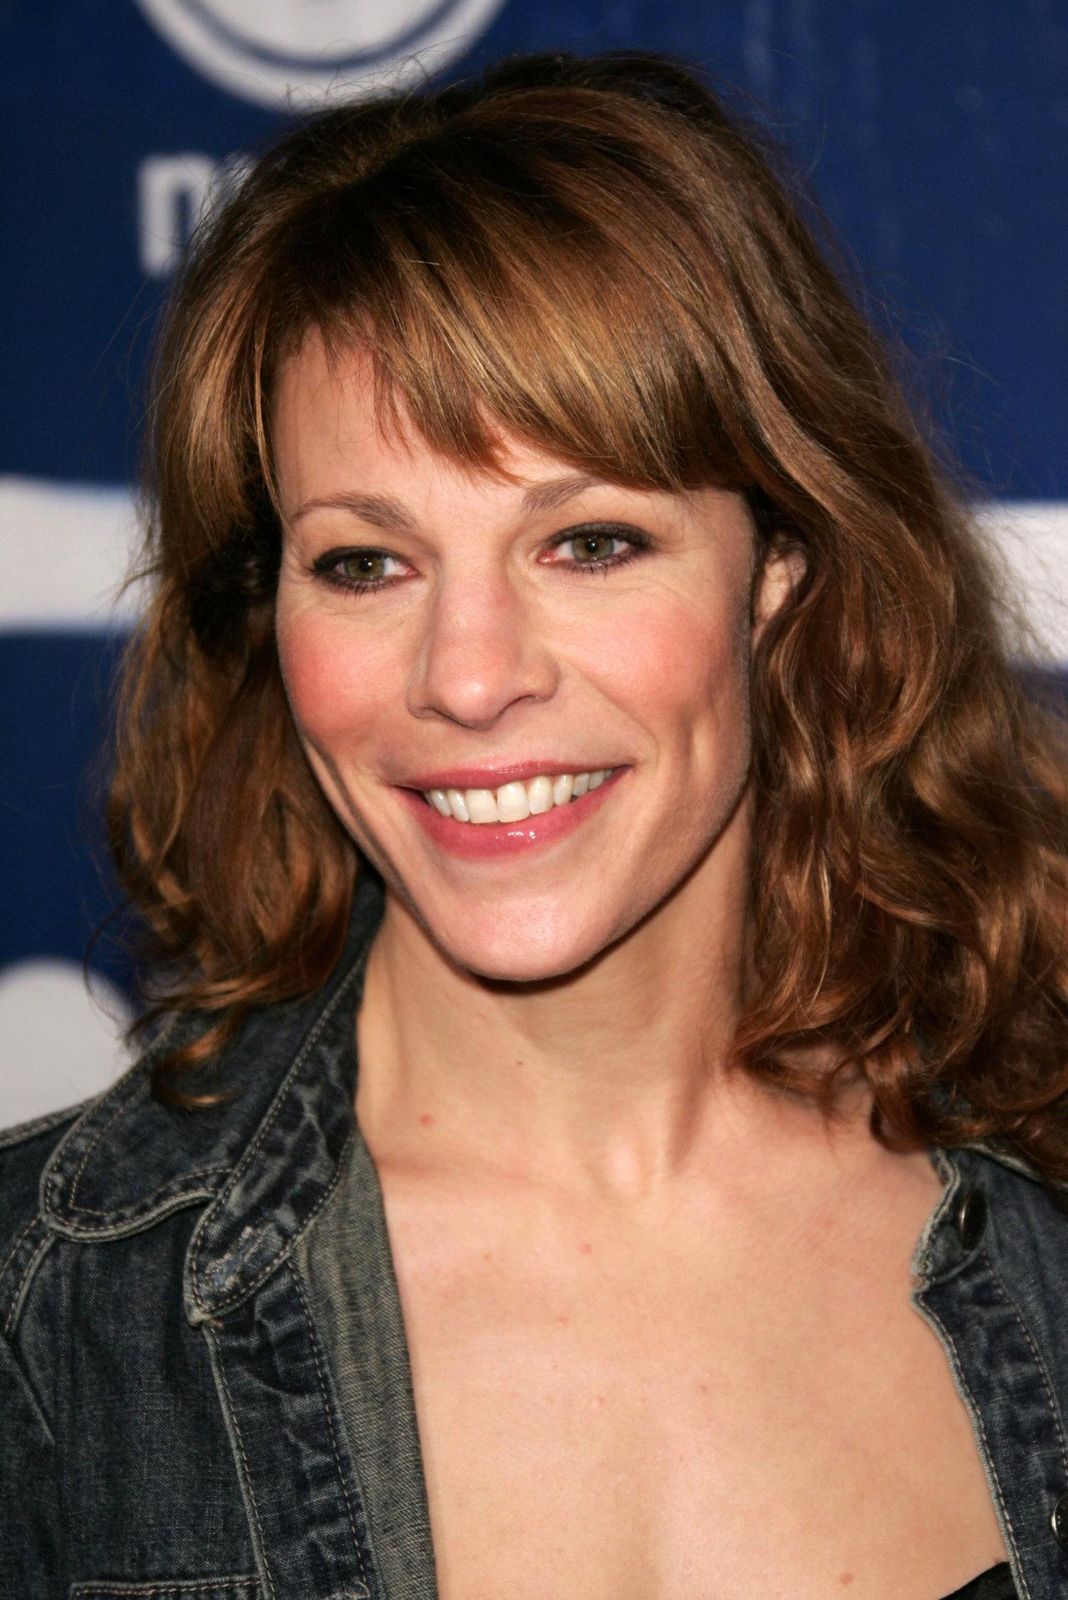 Lili Taylor replaces Angela Bettis in Leatherface